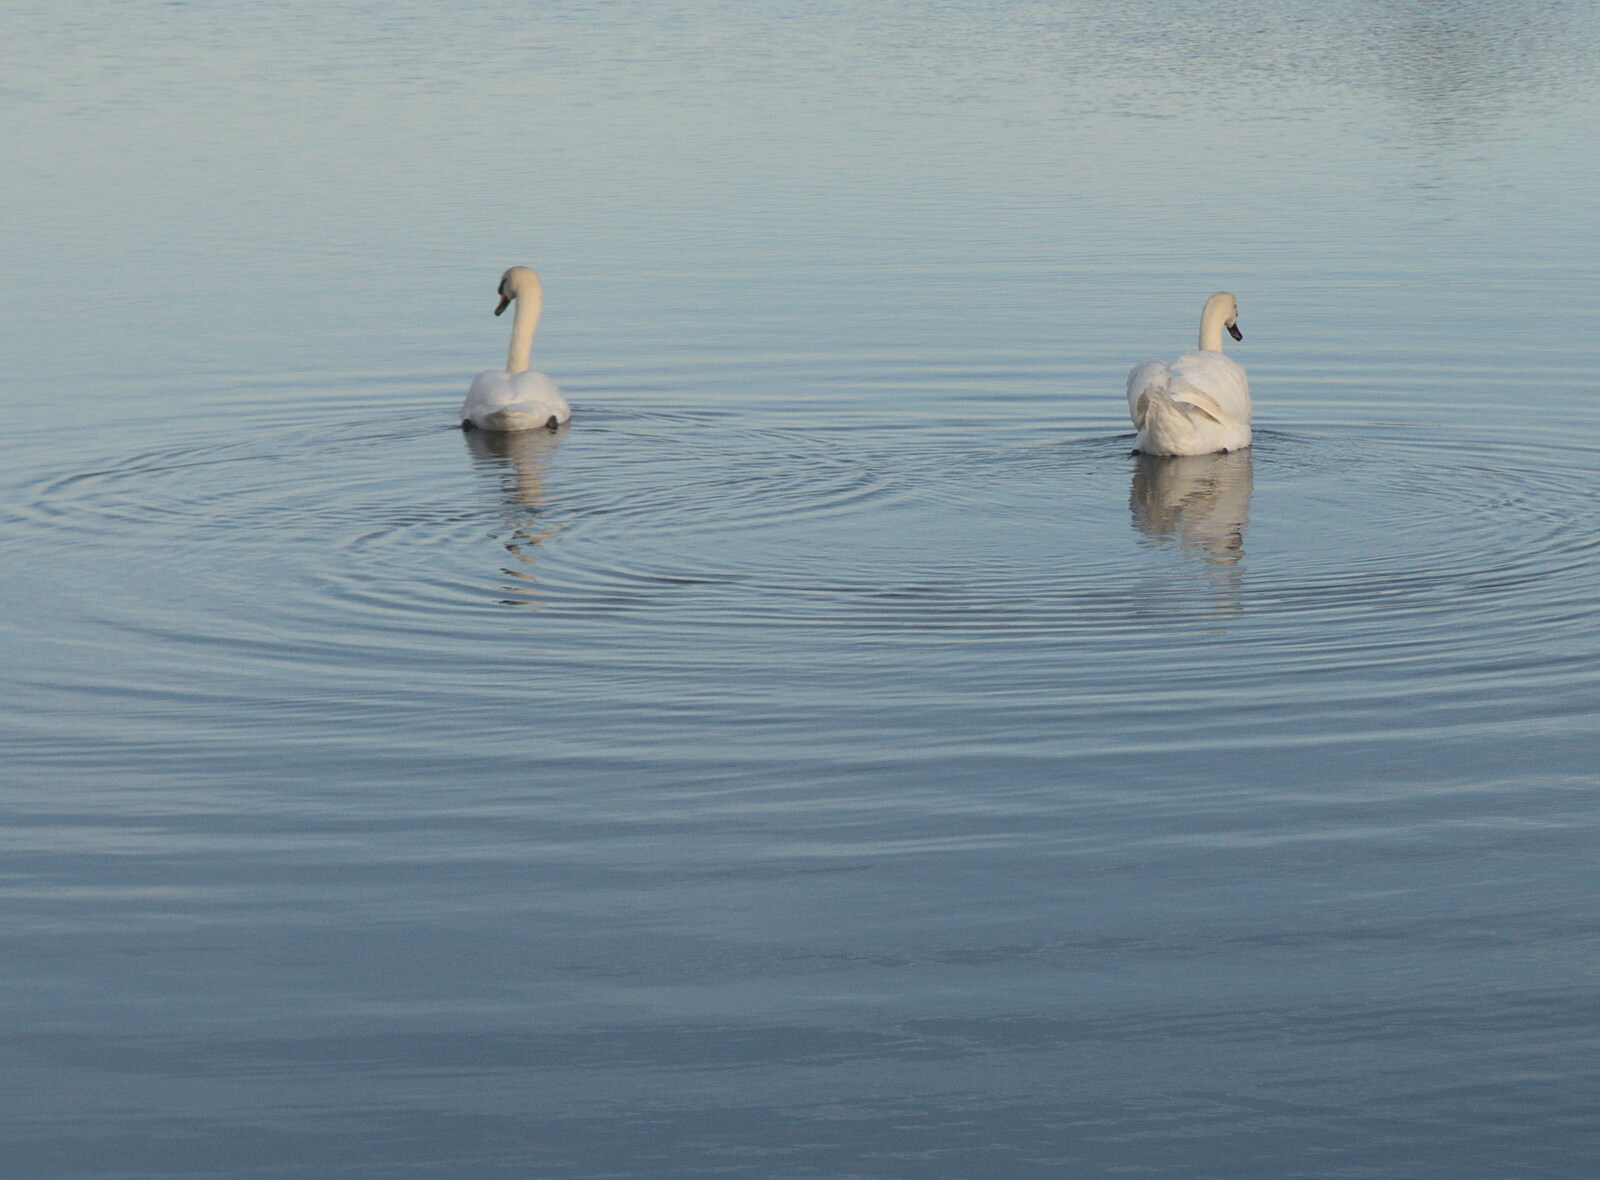 A Trip to the Odeon Cinema, Riverside, Norwich - 29th January 2022: The swans leave rings on the water